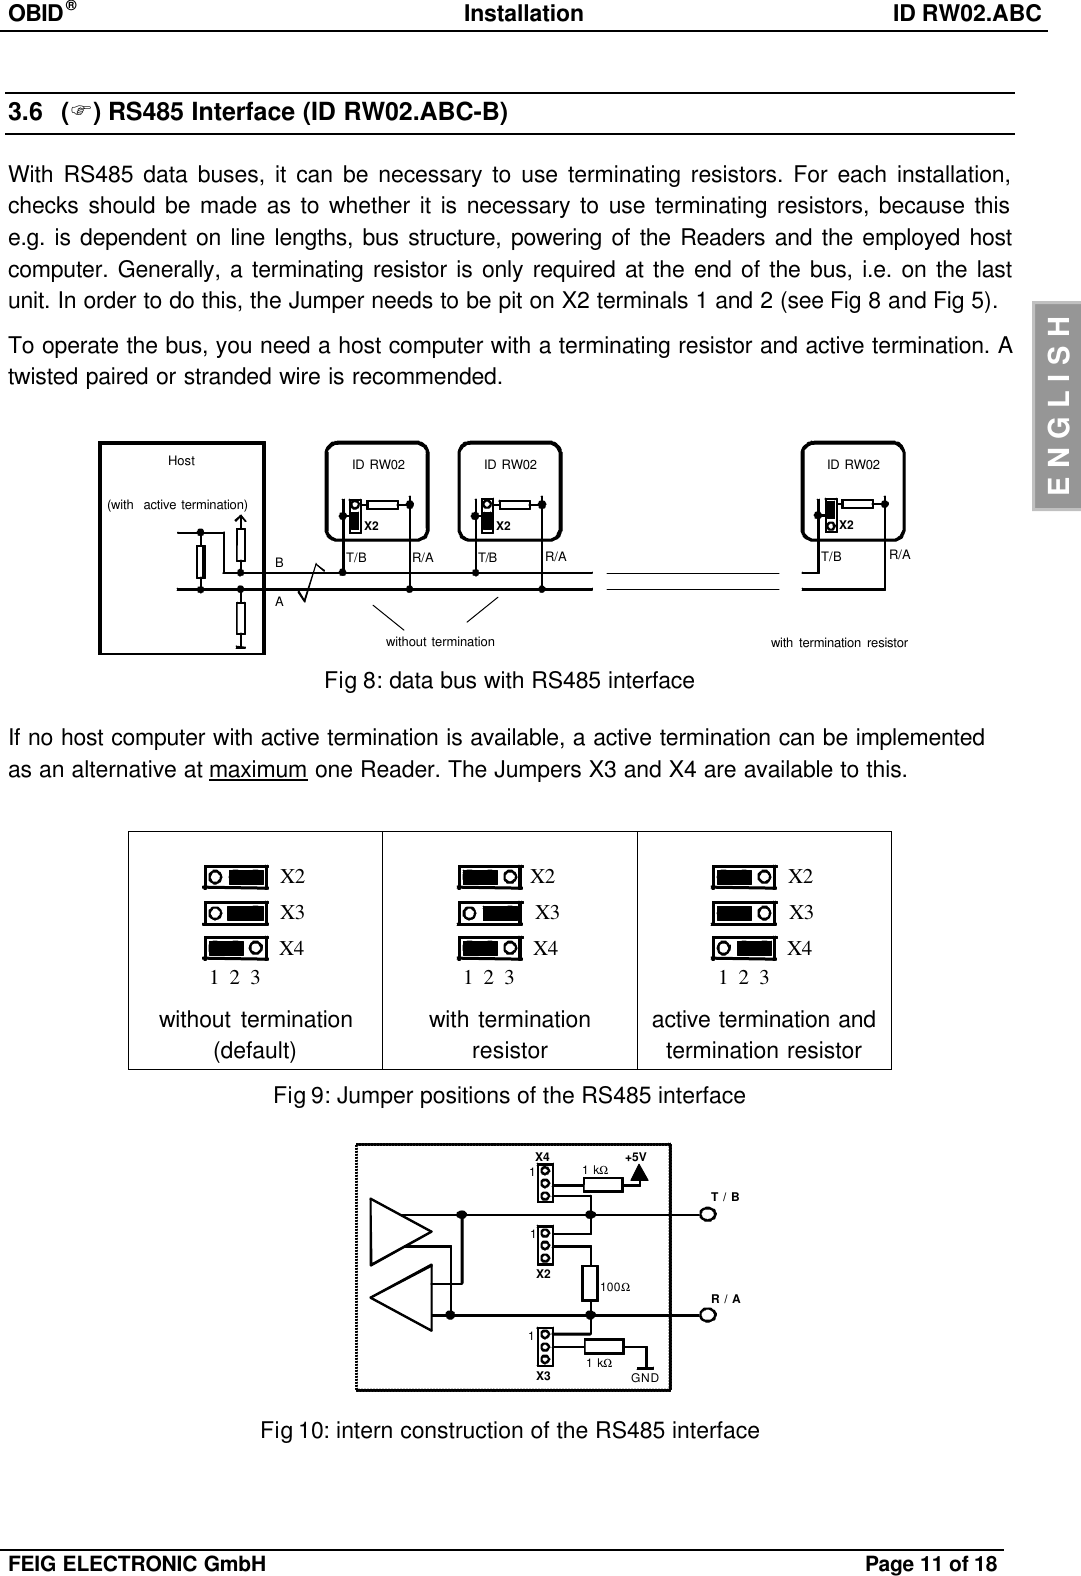 OBID®Installation ID RW02.ABCFEIG ELECTRONIC GmbH Page 11 of 18ENGLISH3.6 (F)RS485 Interface (ID RW02.ABC-B)With RS485 data buses, it can be necessary to use terminating resistors. For each installation,checks should be made as to whether it is necessary to use terminating resistors, because thise.g. is dependent on line lengths, bus structure, powering of the Readers and the employed hostcomputer. Generally, a terminating resistor is only required at the end of the bus, i.e. on the lastunit. In order to do this, the Jumper needs to be pit on X2 terminals 1 and 2 (see Fig 8 and Fig 5).To operate the bus, you need a host computer with a terminating resistor and active termination. Atwisted paired or stranded wire is recommended.Hostwithout terminationR/AT/BID RW02(with  active termination)with termination resistorABX2ID RW02X2ID RW02X2T/B T/BR/A R/AFig 8: data bus with RS485 interfaceIf no host computer with active termination is available, a active termination can be implementedas an alternative at maximum one Reader. The Jumpers X3 and X4 are available to this.1  2  3X2X3X41  2  3X2X3X41  2  3X2X3X4without termination(default)with terminationresistoractive termination andtermination resistorFig 9: Jumper positions of the RS485 interfaceFig 10: intern construction of the RS485 interfaceX2X3X4 +5VGND1T / BR / A111 kΩ1 kΩ100Ω